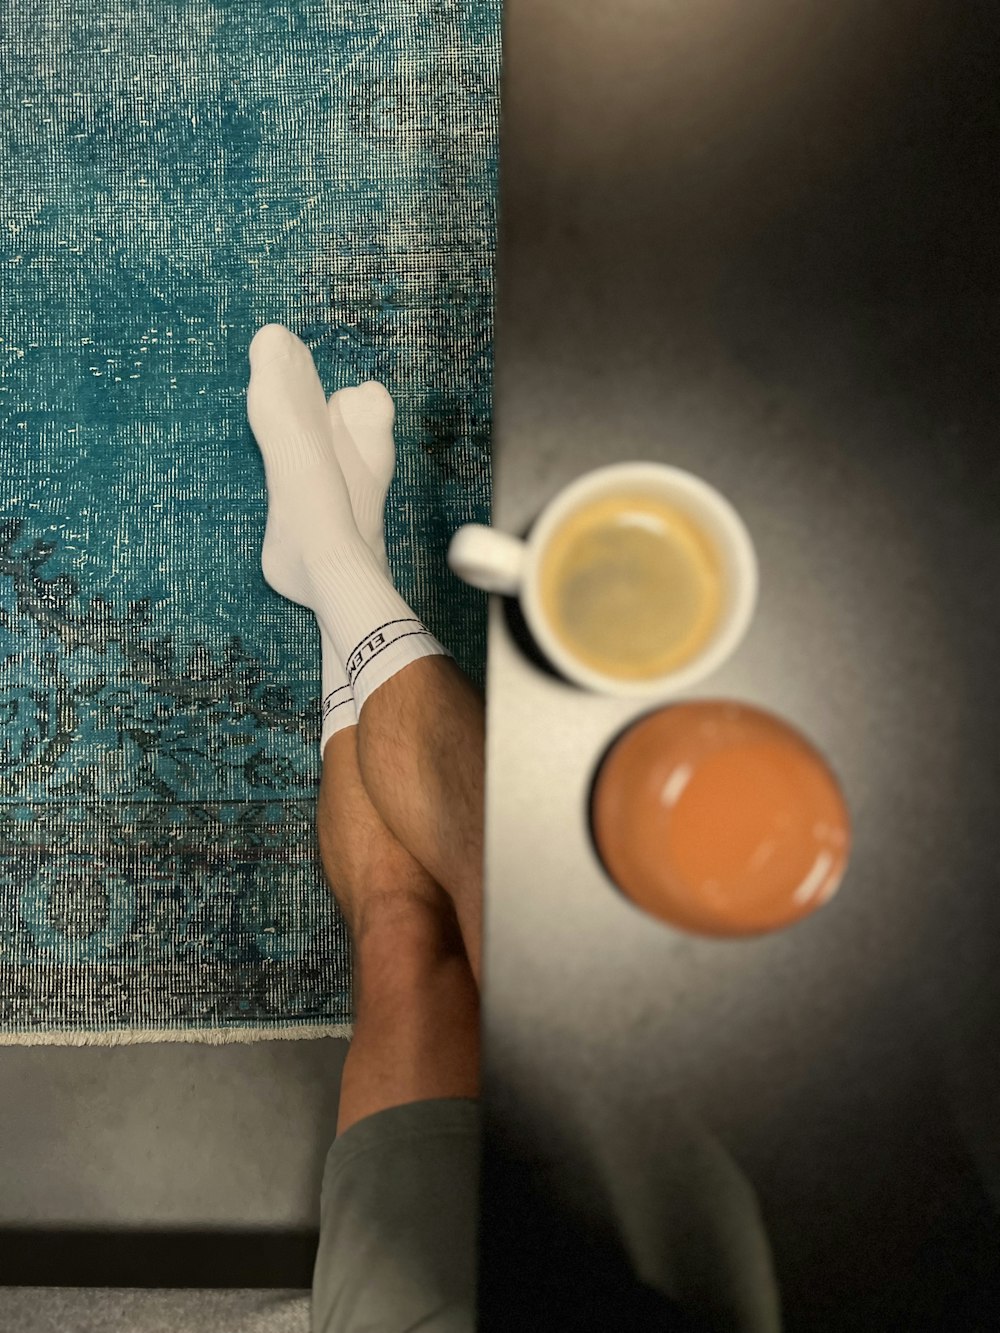 a person's feet with white socks and a cup of coffee